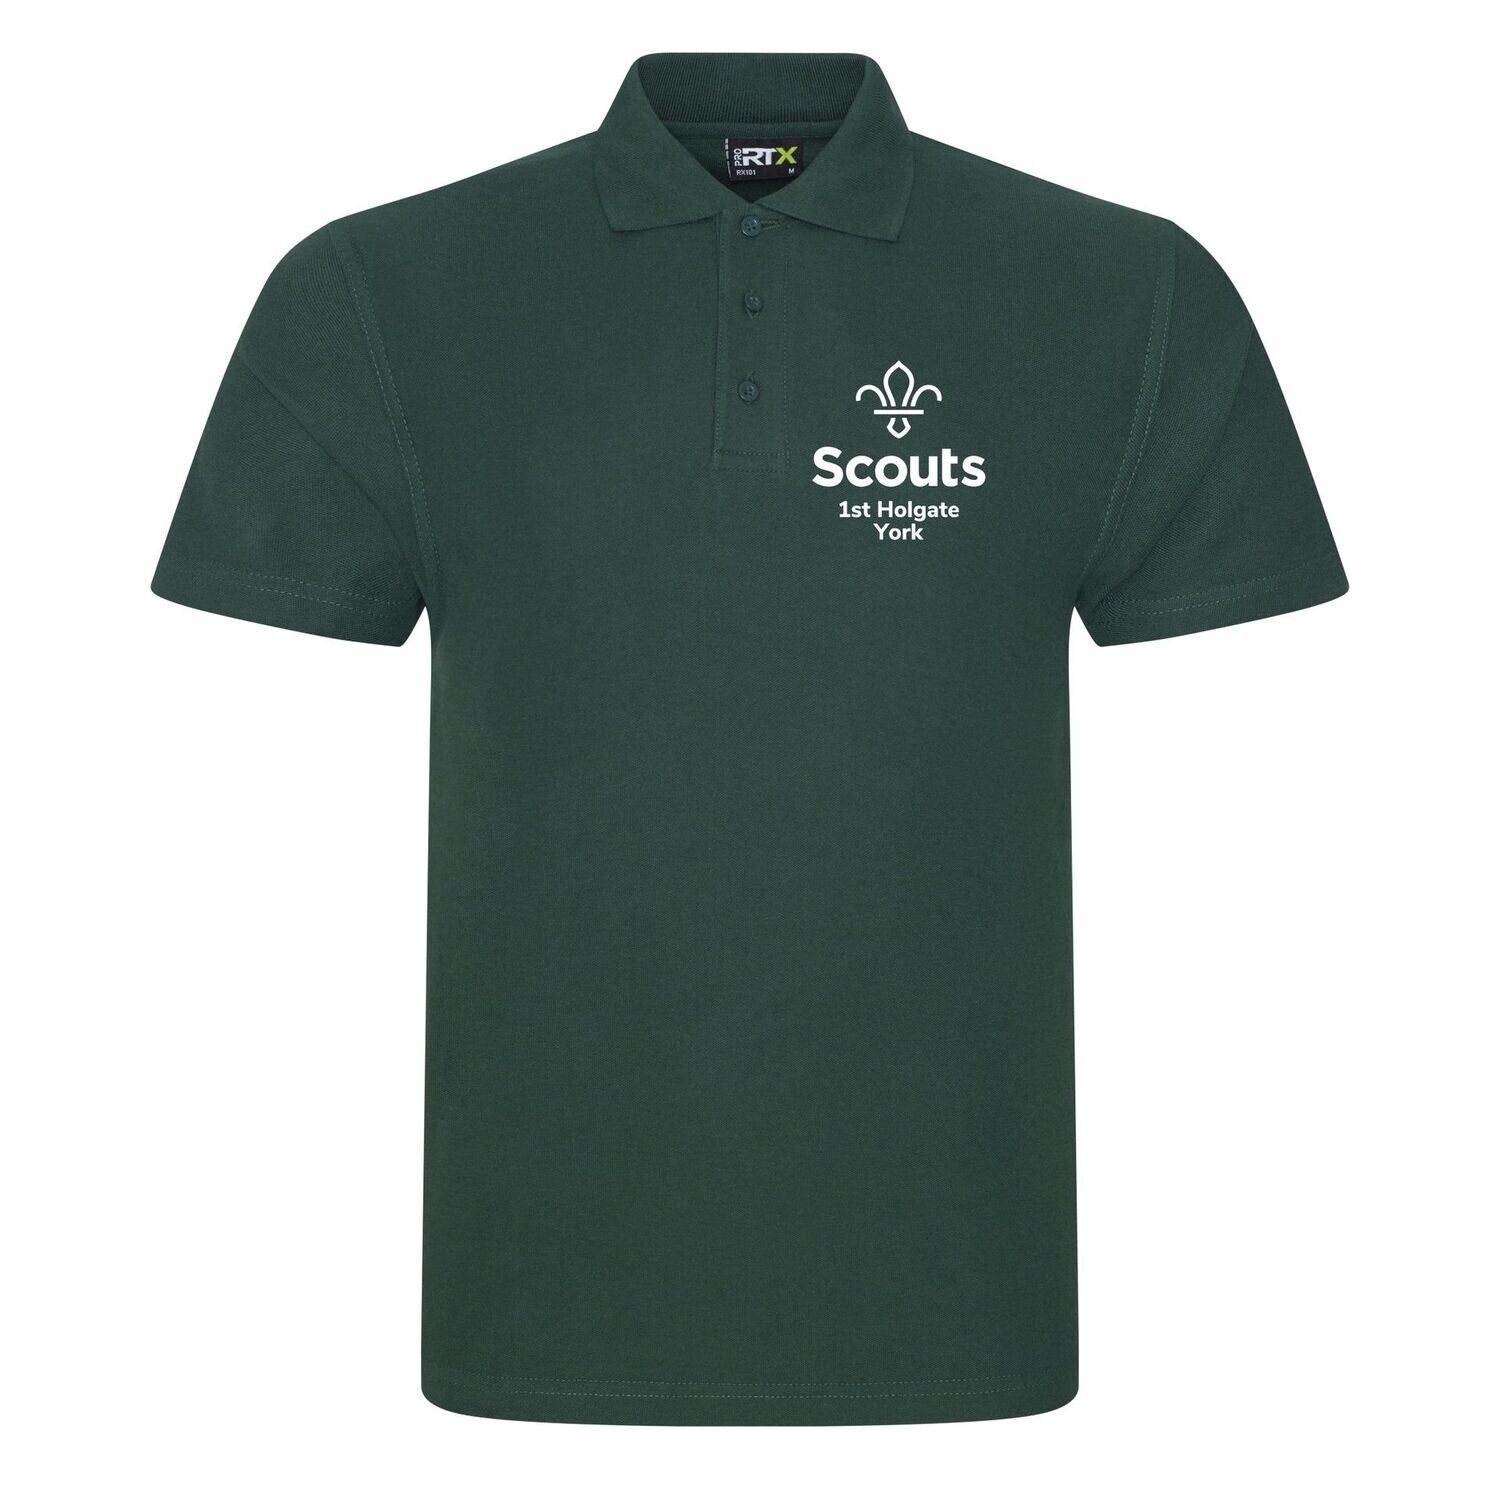 SS417 First Holgate York Scouts - Kids Bottle Green Polo